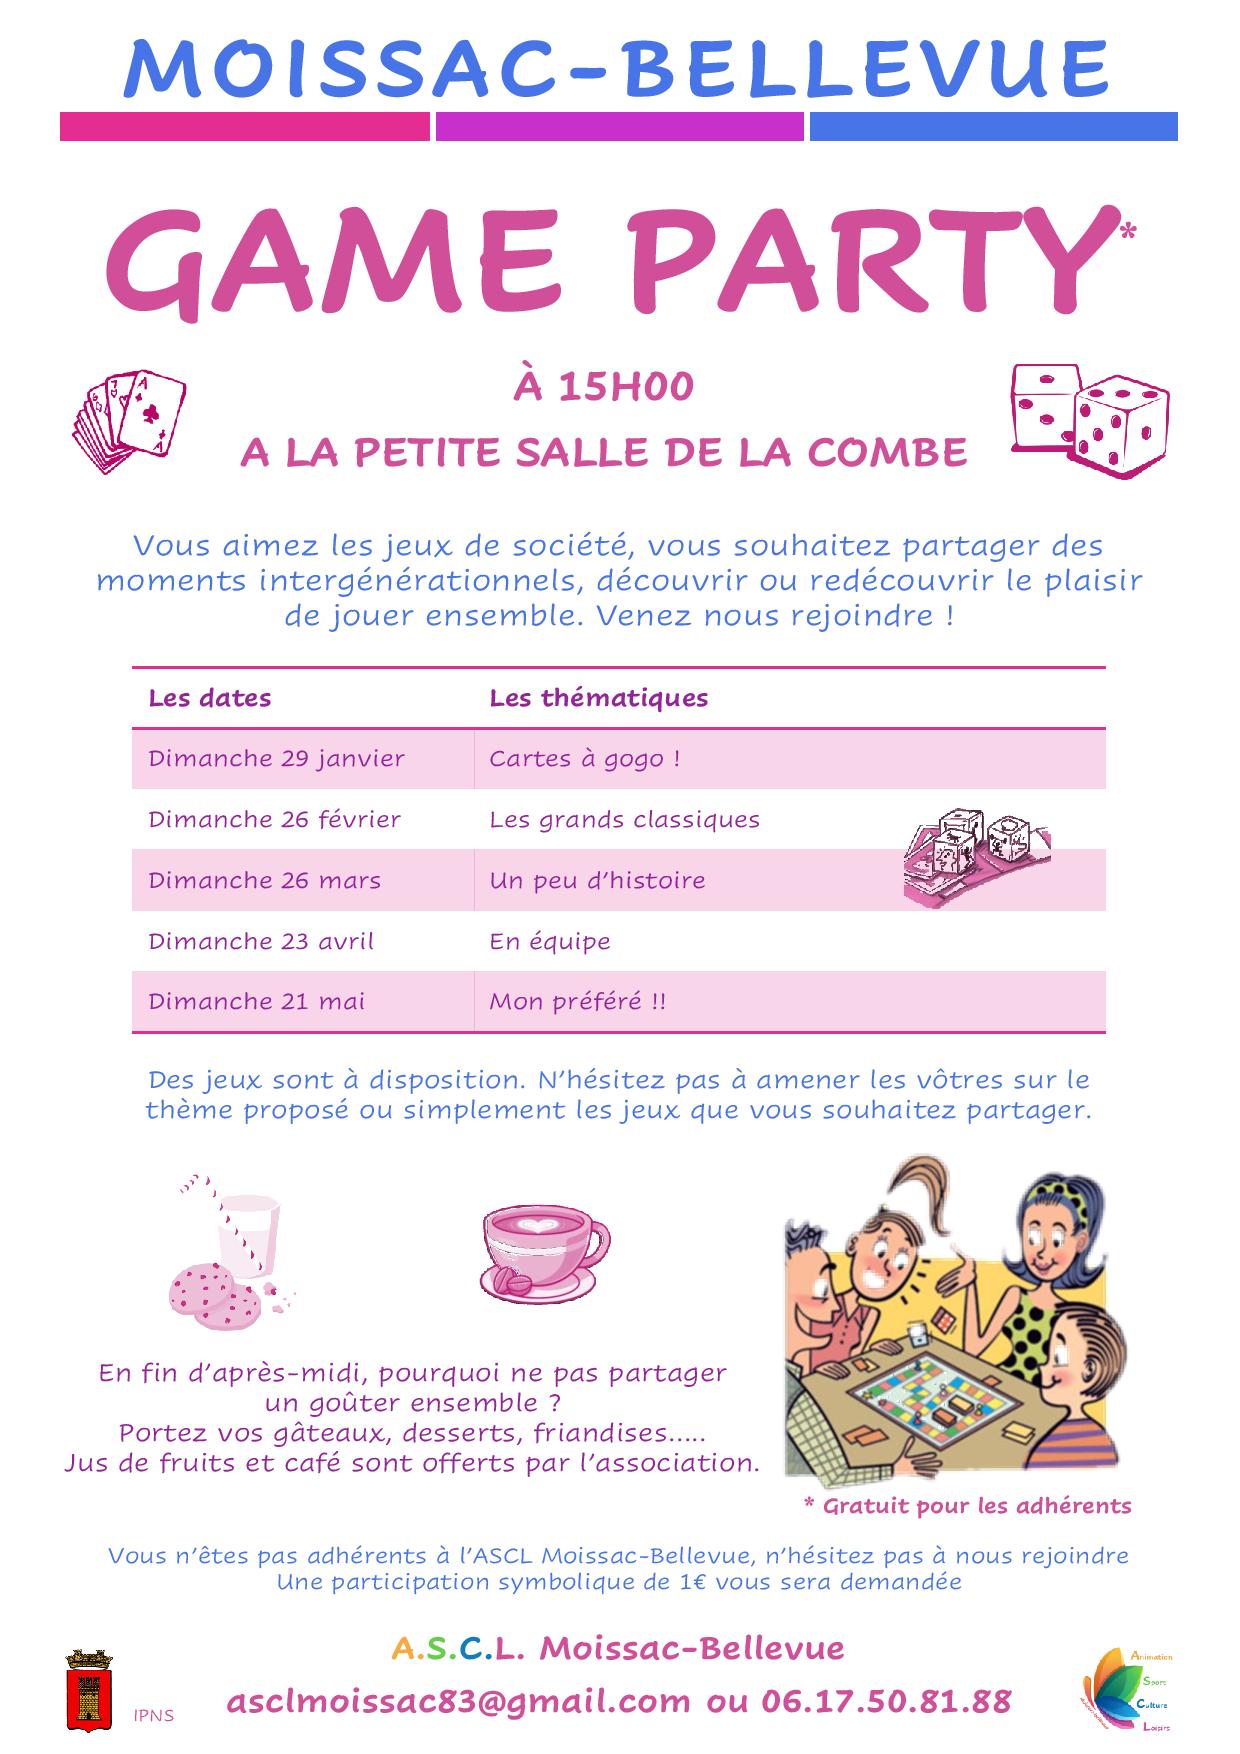 Game Party - Game Party